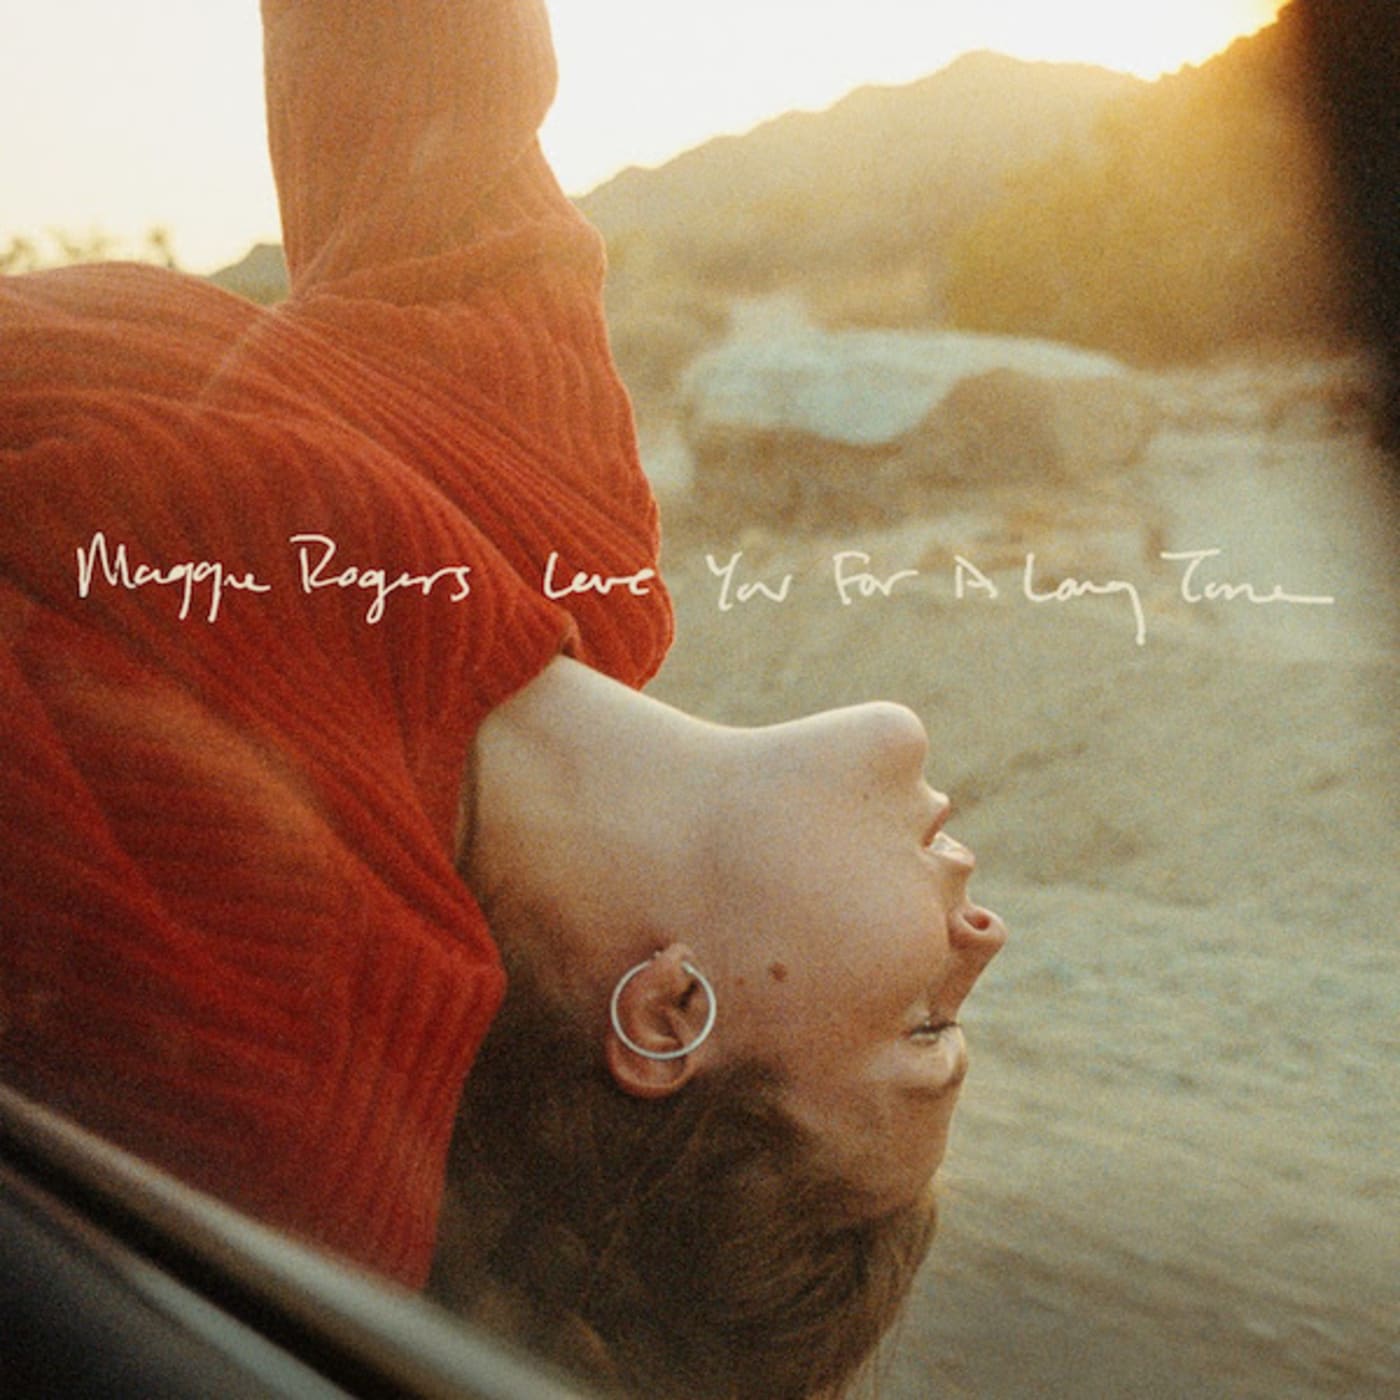 Maggie Rogers Shares New Song “Love You for a Long Time” Complex